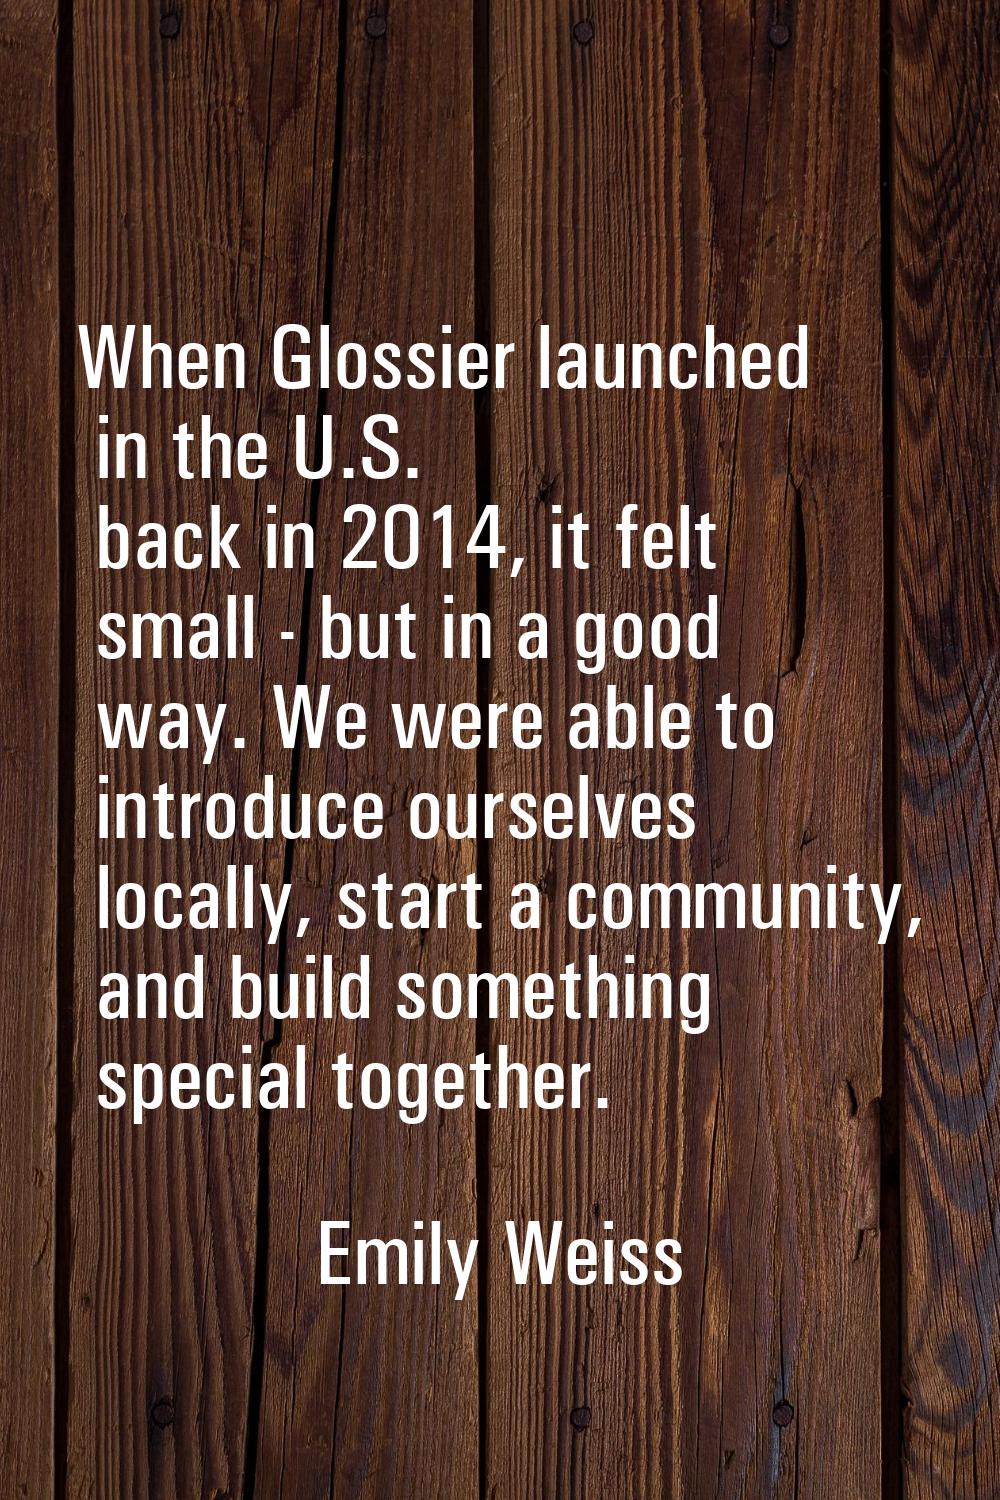 When Glossier launched in the U.S. back in 2014, it felt small - but in a good way. We were able to